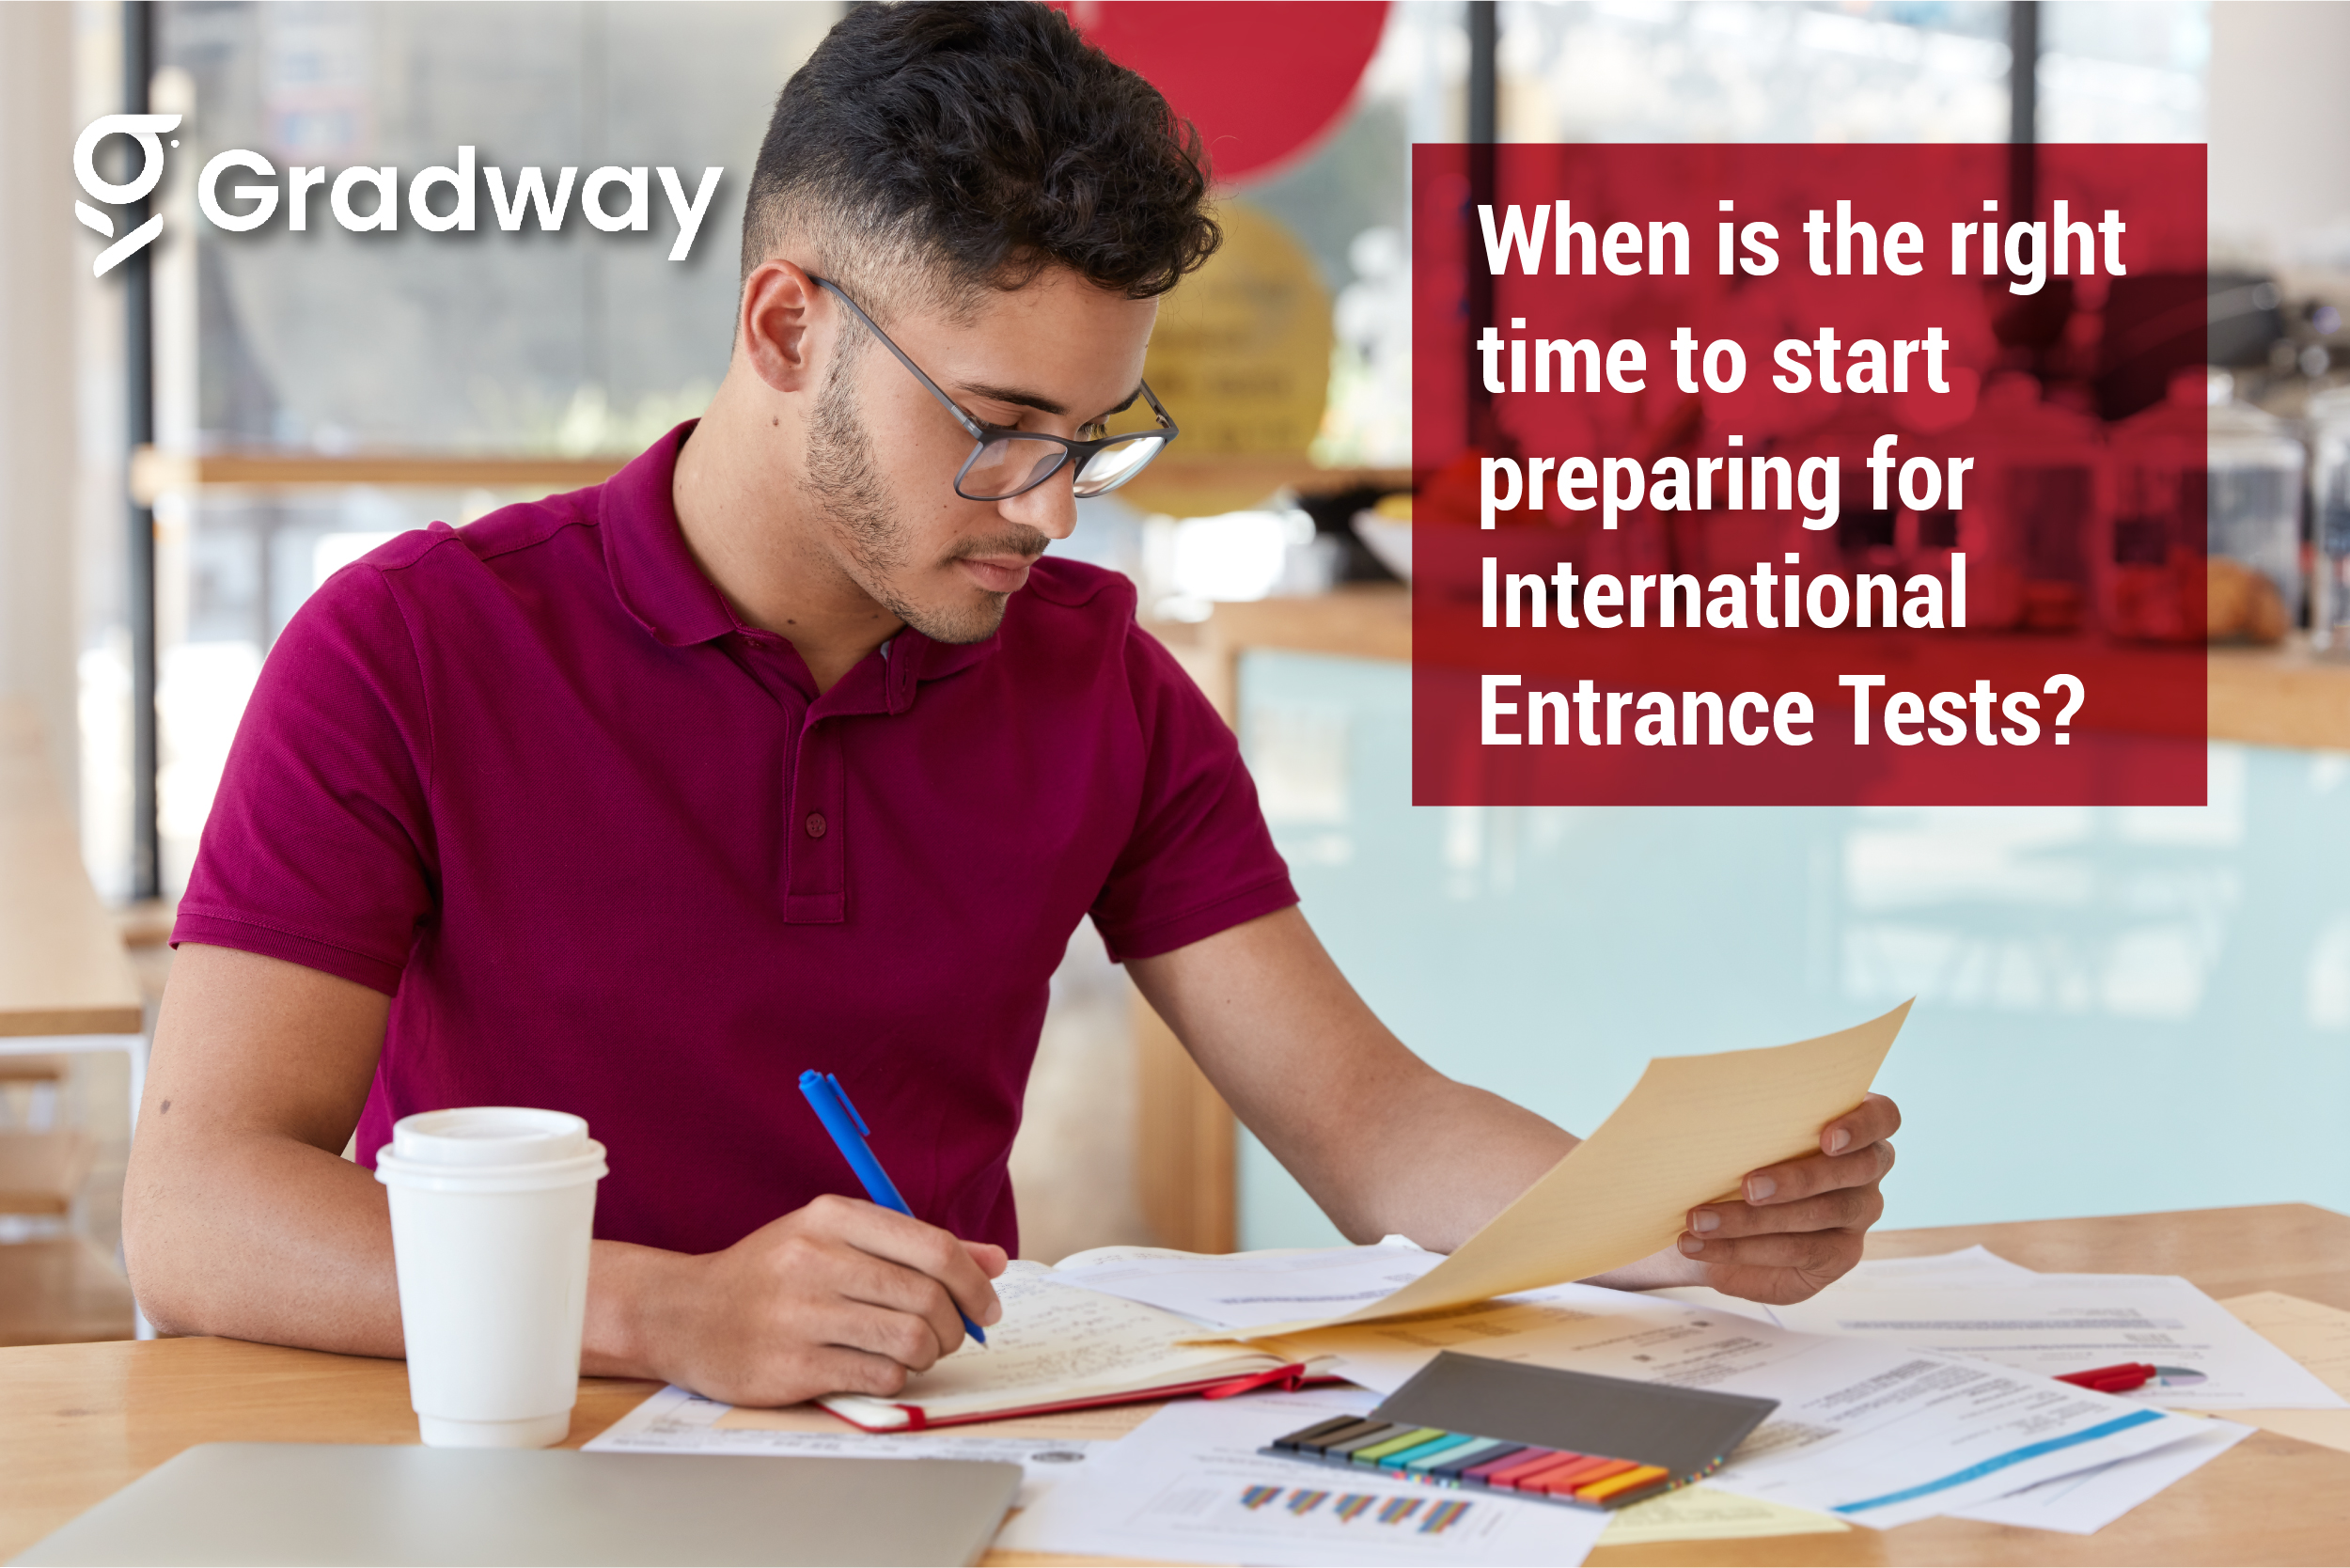 When is the right time to start preparing for International Entrance Tests? | Gradway